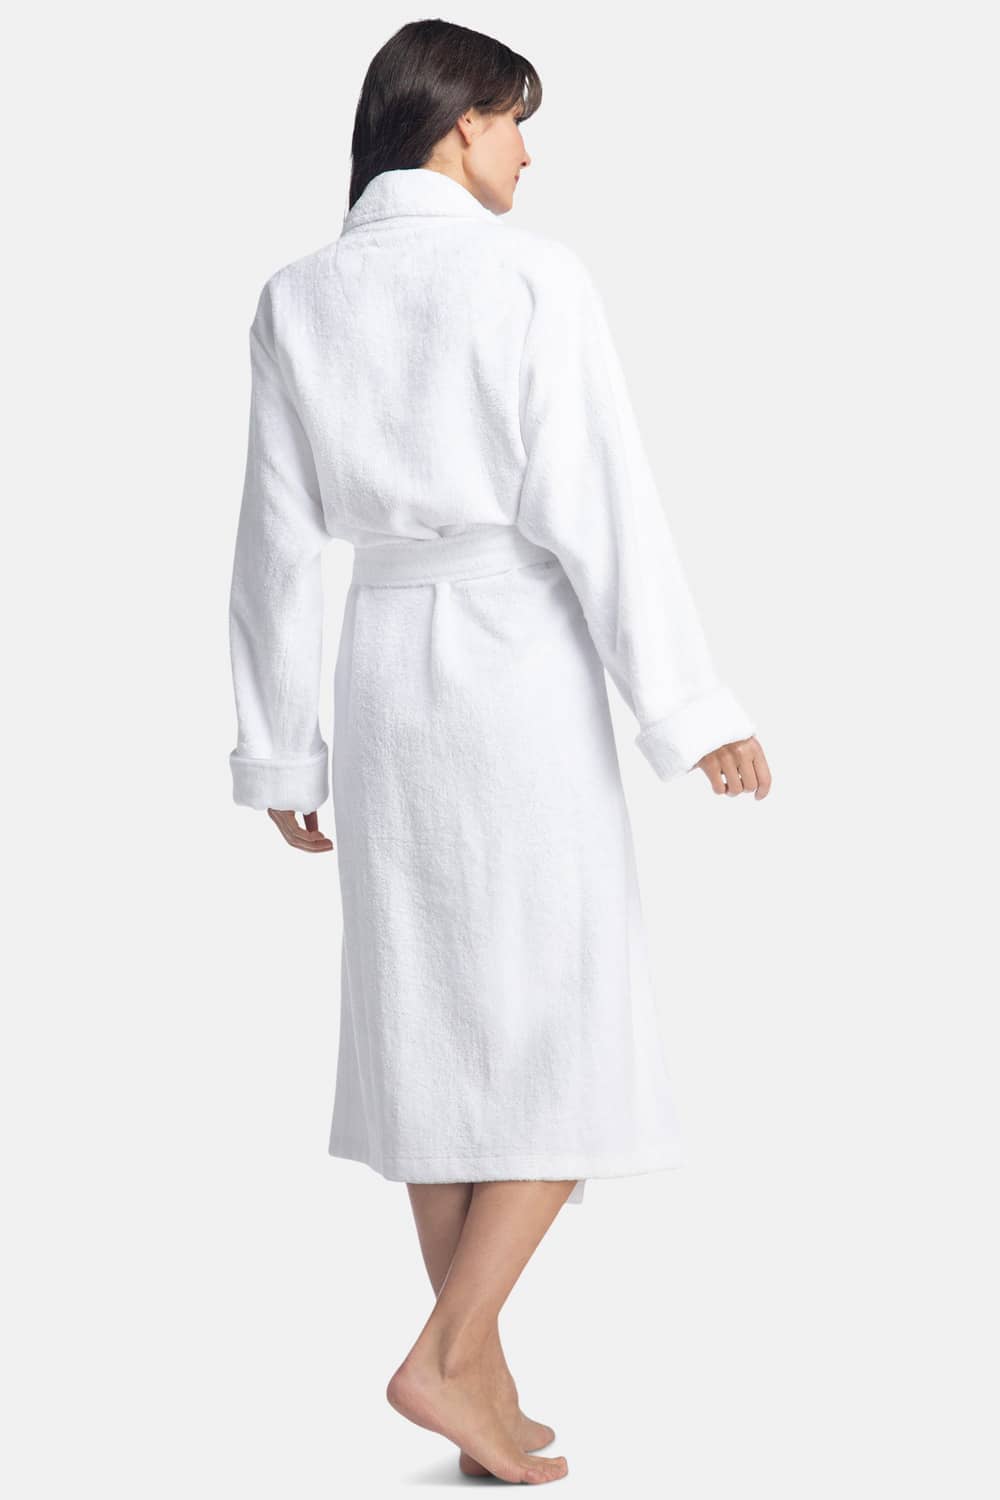 Women's Premier Turkish-Style Full Length Terry Cloth Spa Robe Womens>Spa>Robe Fishers Finery 